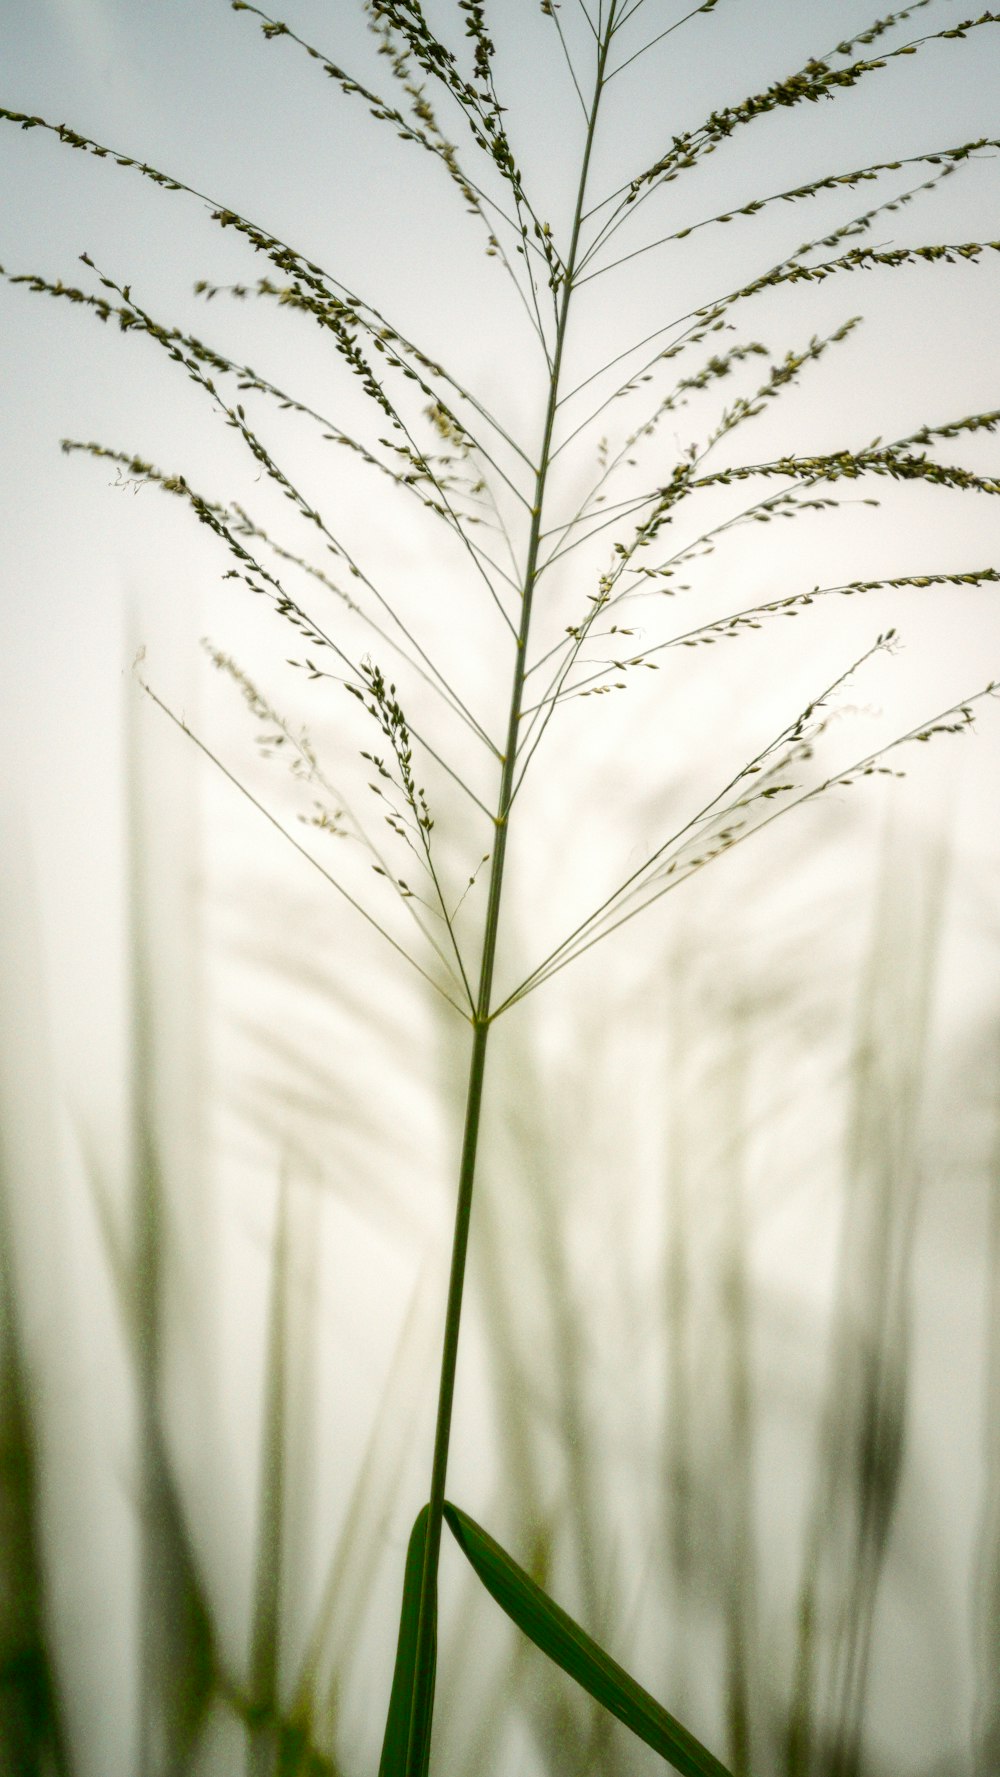 grayscale photo of grass with water droplets